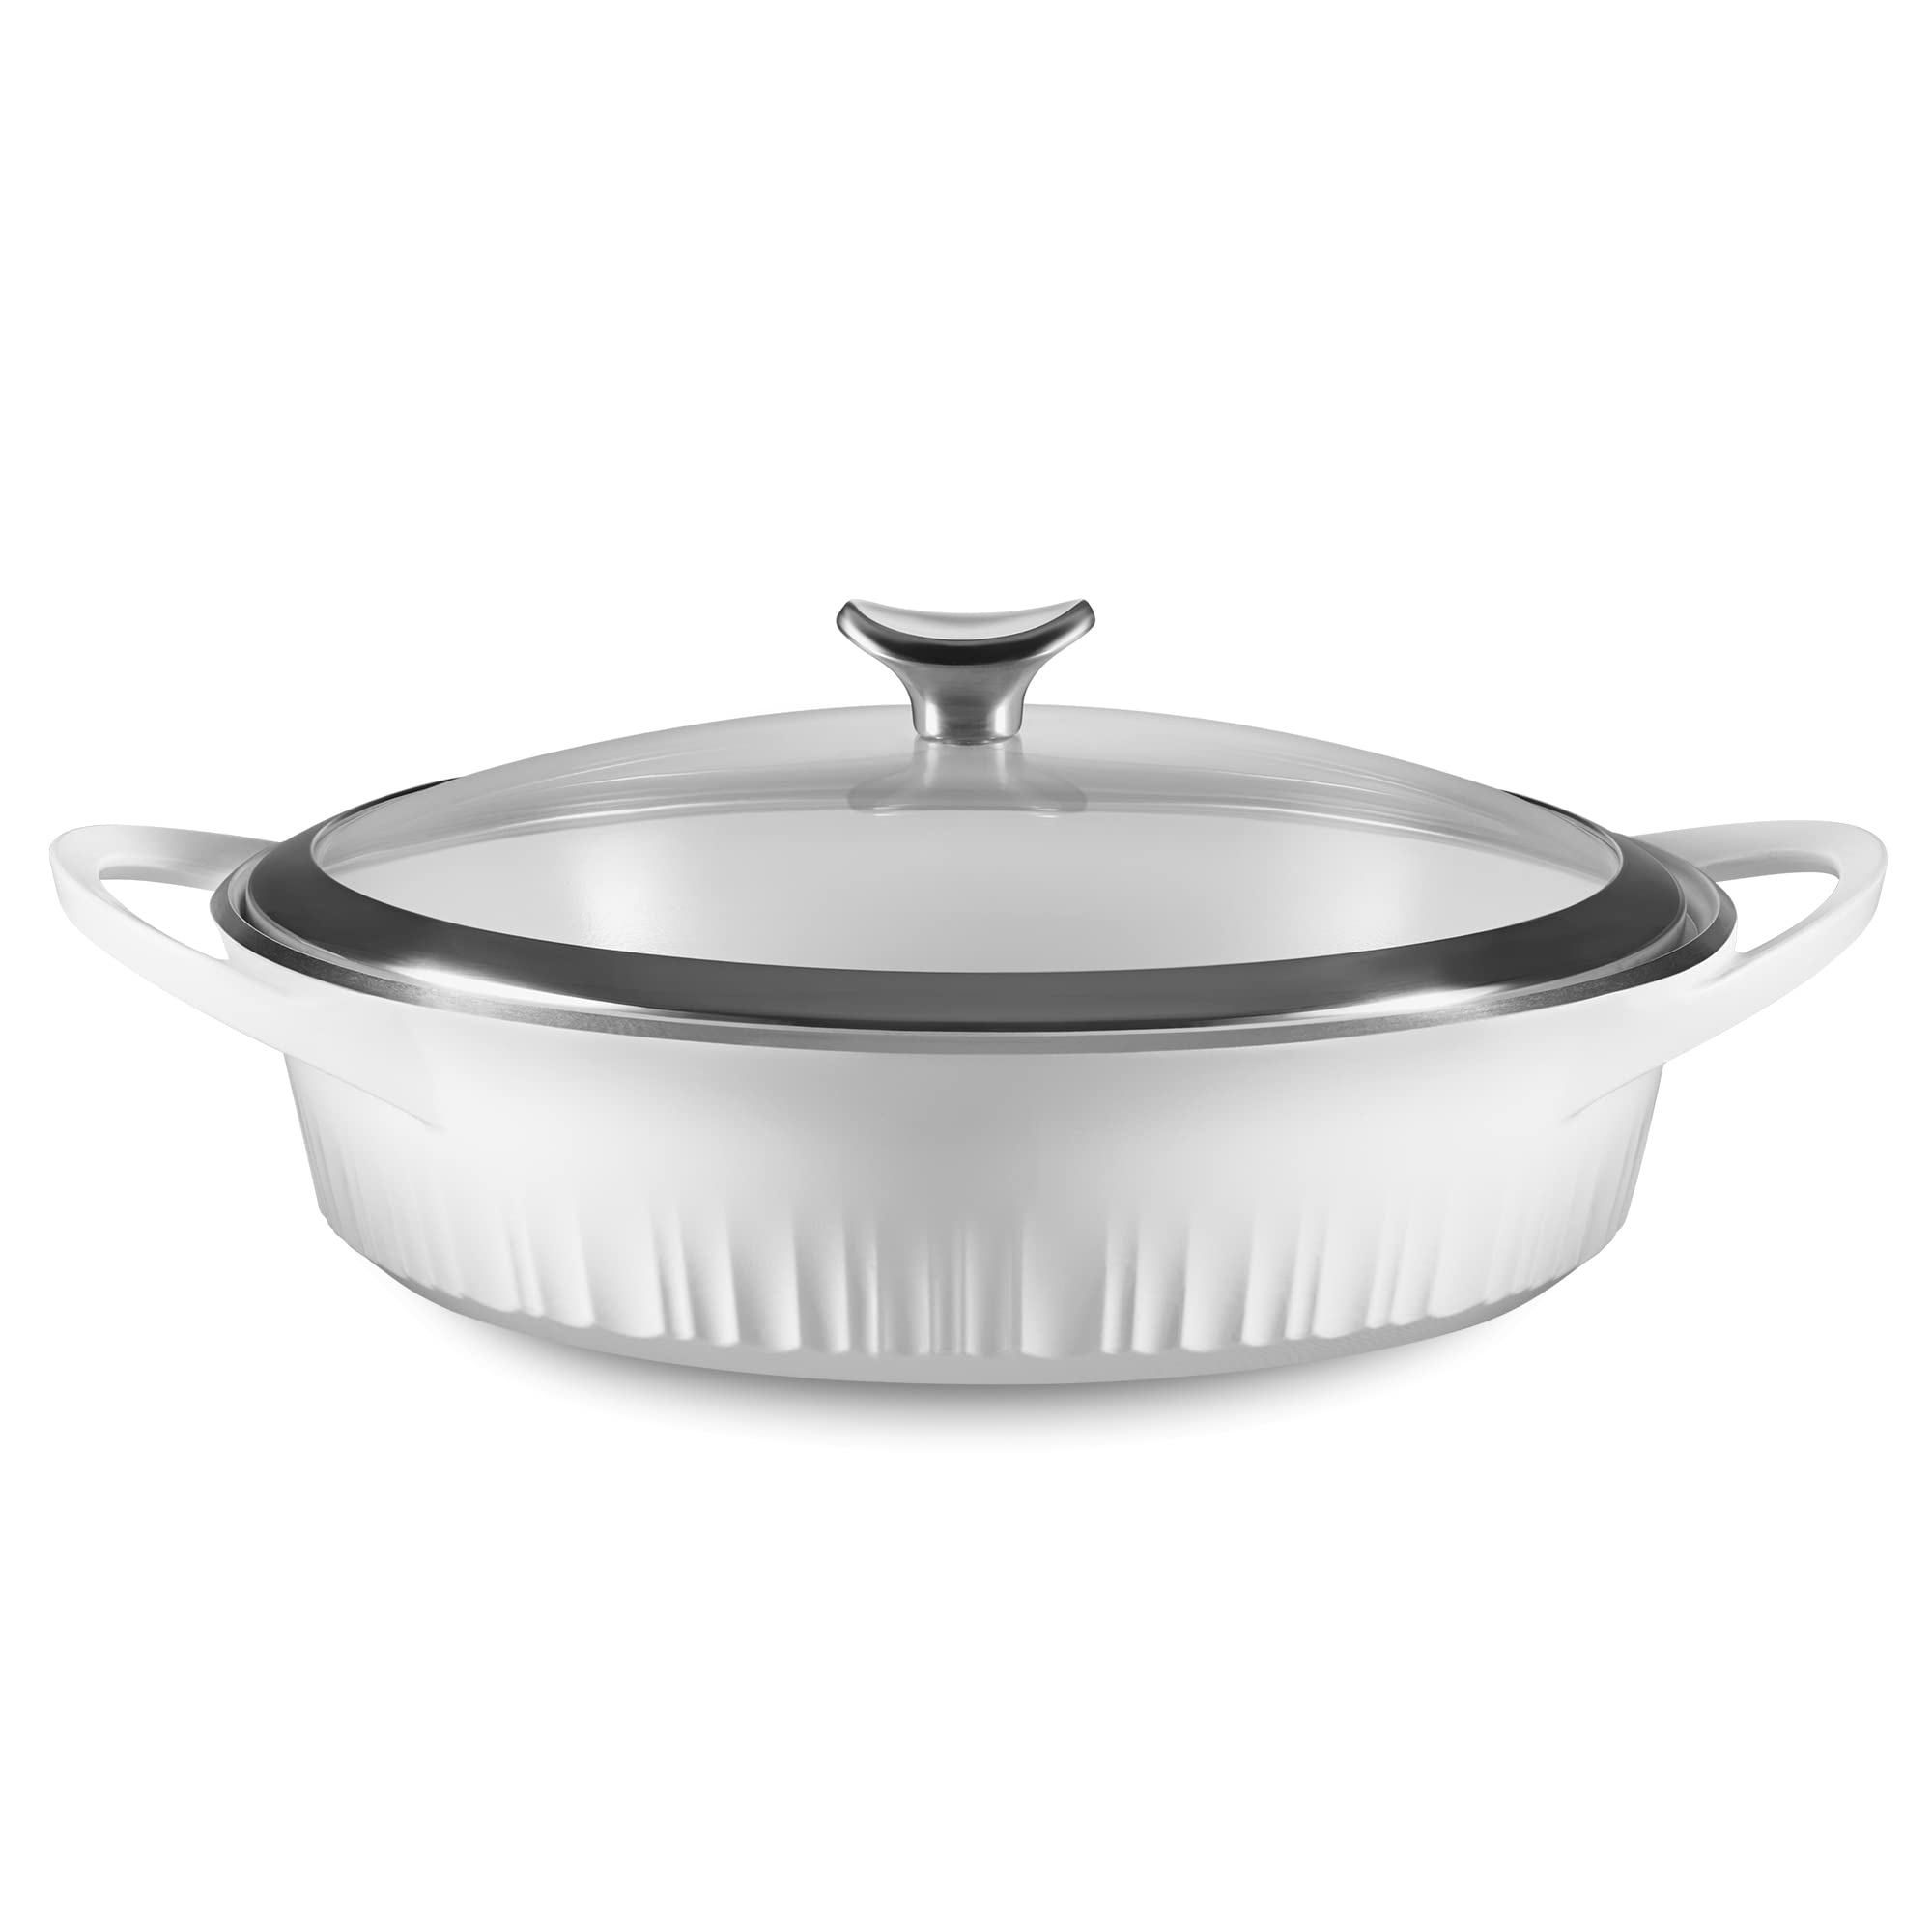 CorningWare QuickHeat 4-QT Cast Aluminum Braiser With Lid, Nonstick Ceramic Interior, Lightweight and Fast Even Heat Baking & Cooking, For Meats, Soup, Browning, Searing, French White